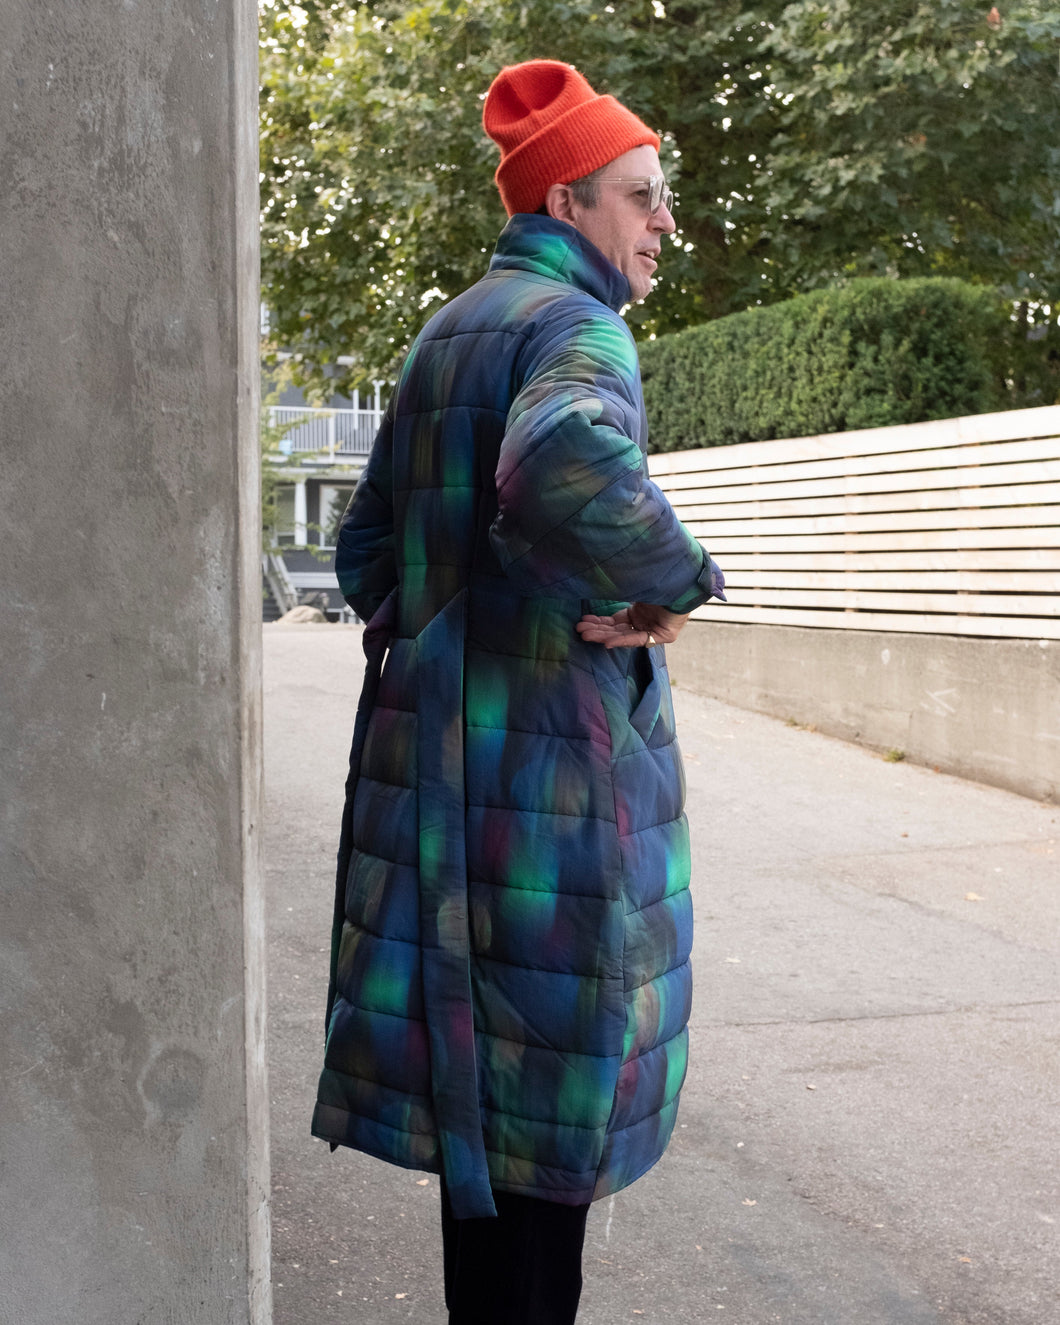 Kildare looking really cool in an alleyway in his Halo coat, nor hat and fishtail pants outfit... the color contract between the blurry dots pattern (blue, green, pink) and the orange nor hat is further sophisticated by the textural addition of oliver spencer's deep navy corduroy fishtail trousers....